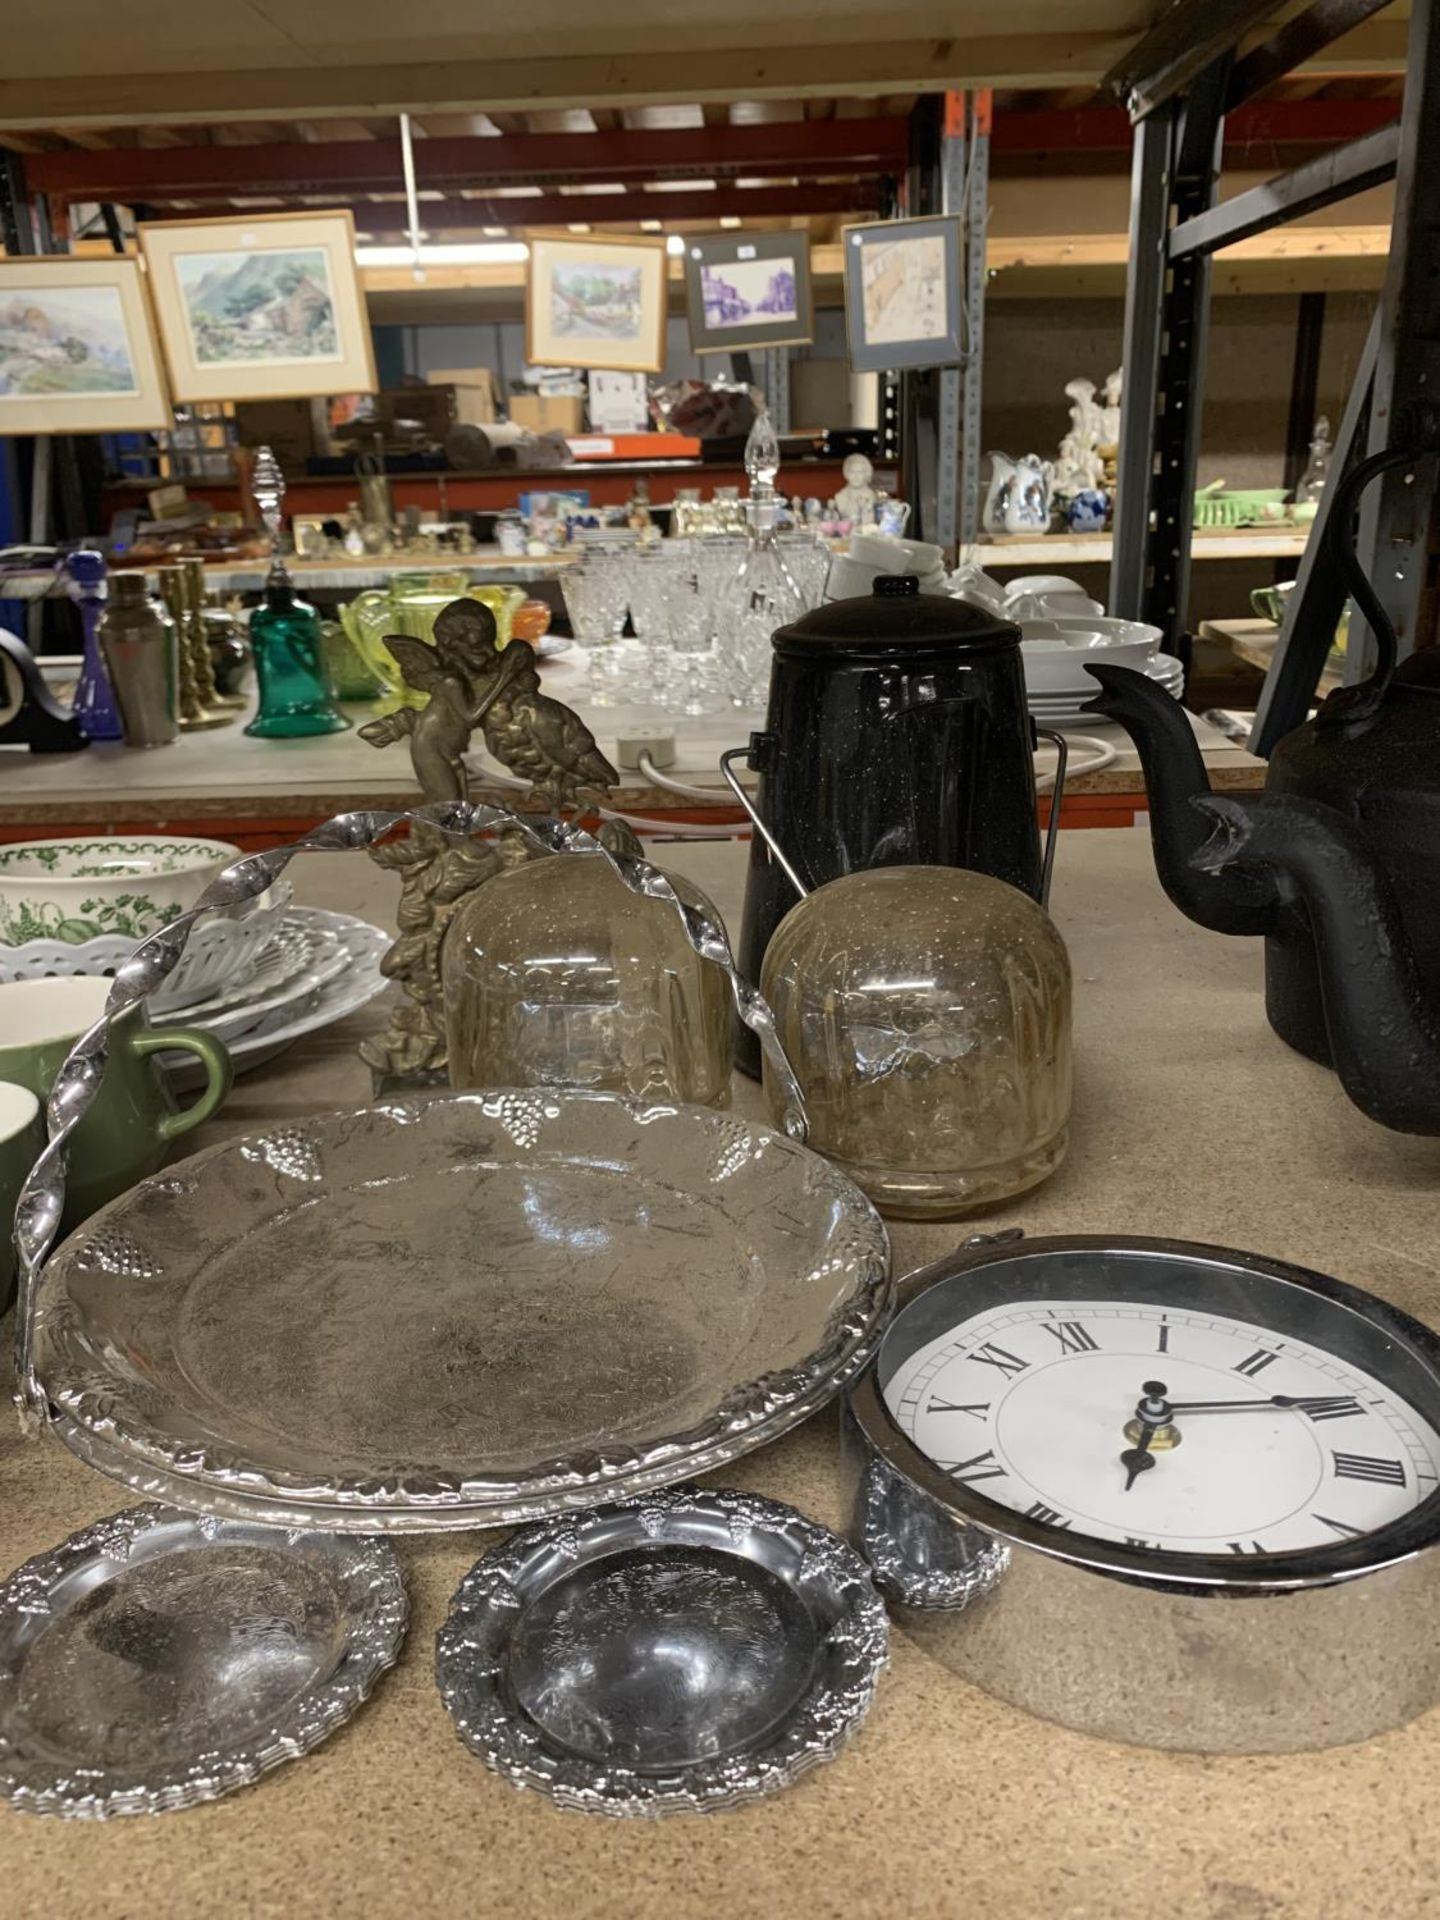 VARIOUS ITEMS TO INCLUDE AN ORNATE BRASS MANTLE CLOCK, A TEA CAN, CLOCK ETC